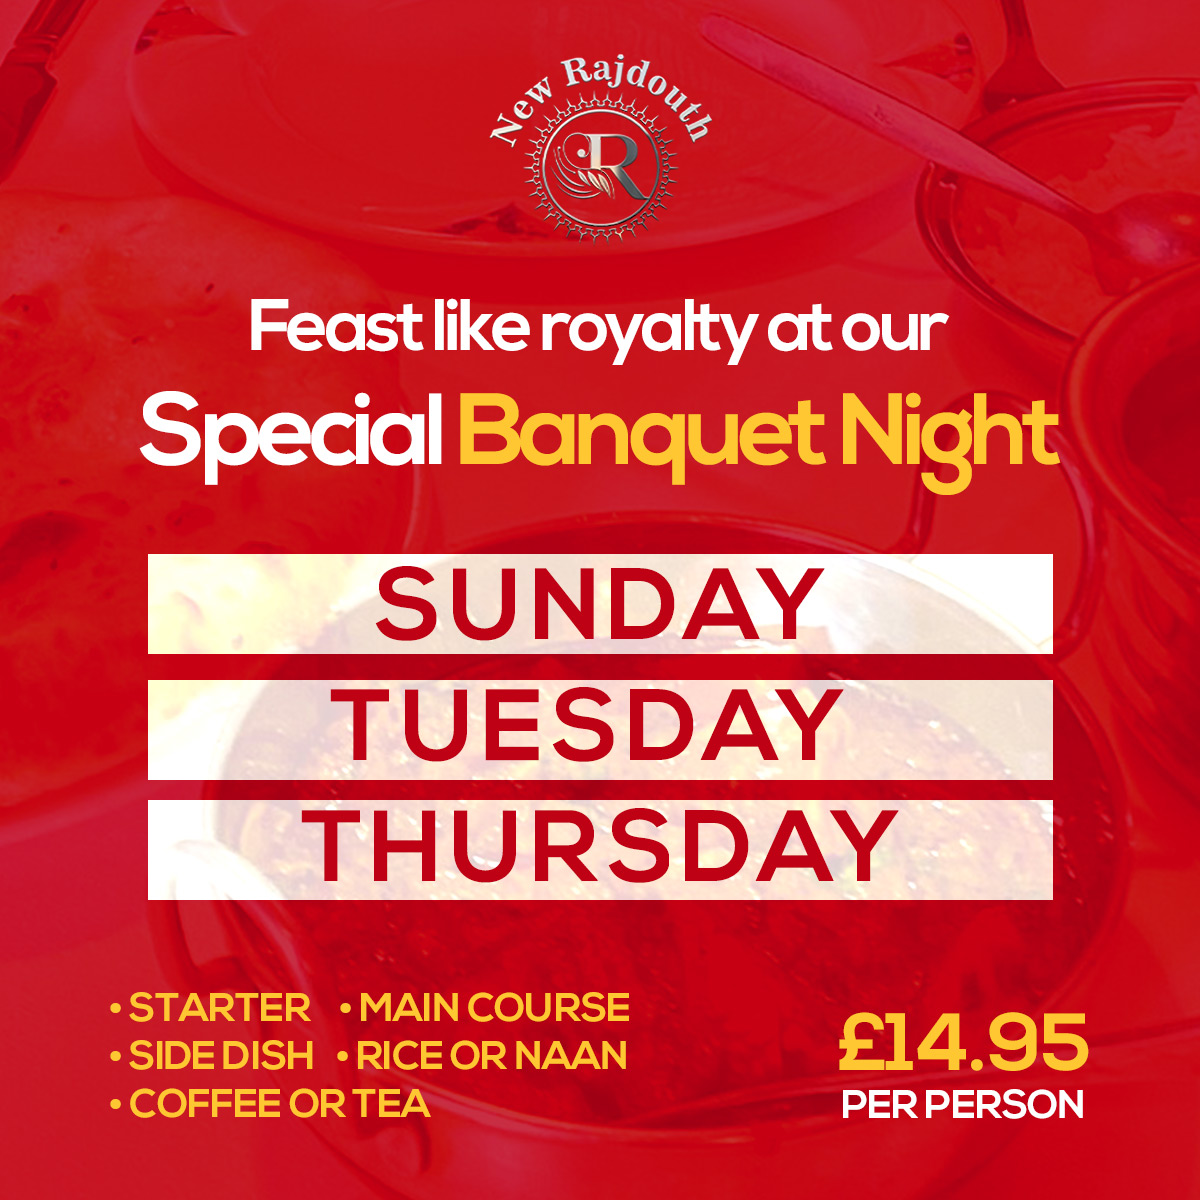 Make your Sundays, Tuesdays, and Thursdays extra special with our Banquet! 🍴 - ☎️ 01908 506600 🌐 raj-douth.co.uk 📌 8 White Horse Drive, Emerson Valley, Milton Keynes MK4 2AS - - - #NewRajdouth #banquet #buffetmenu #indianfood #ordernow #indianrestaurant #butterchicken